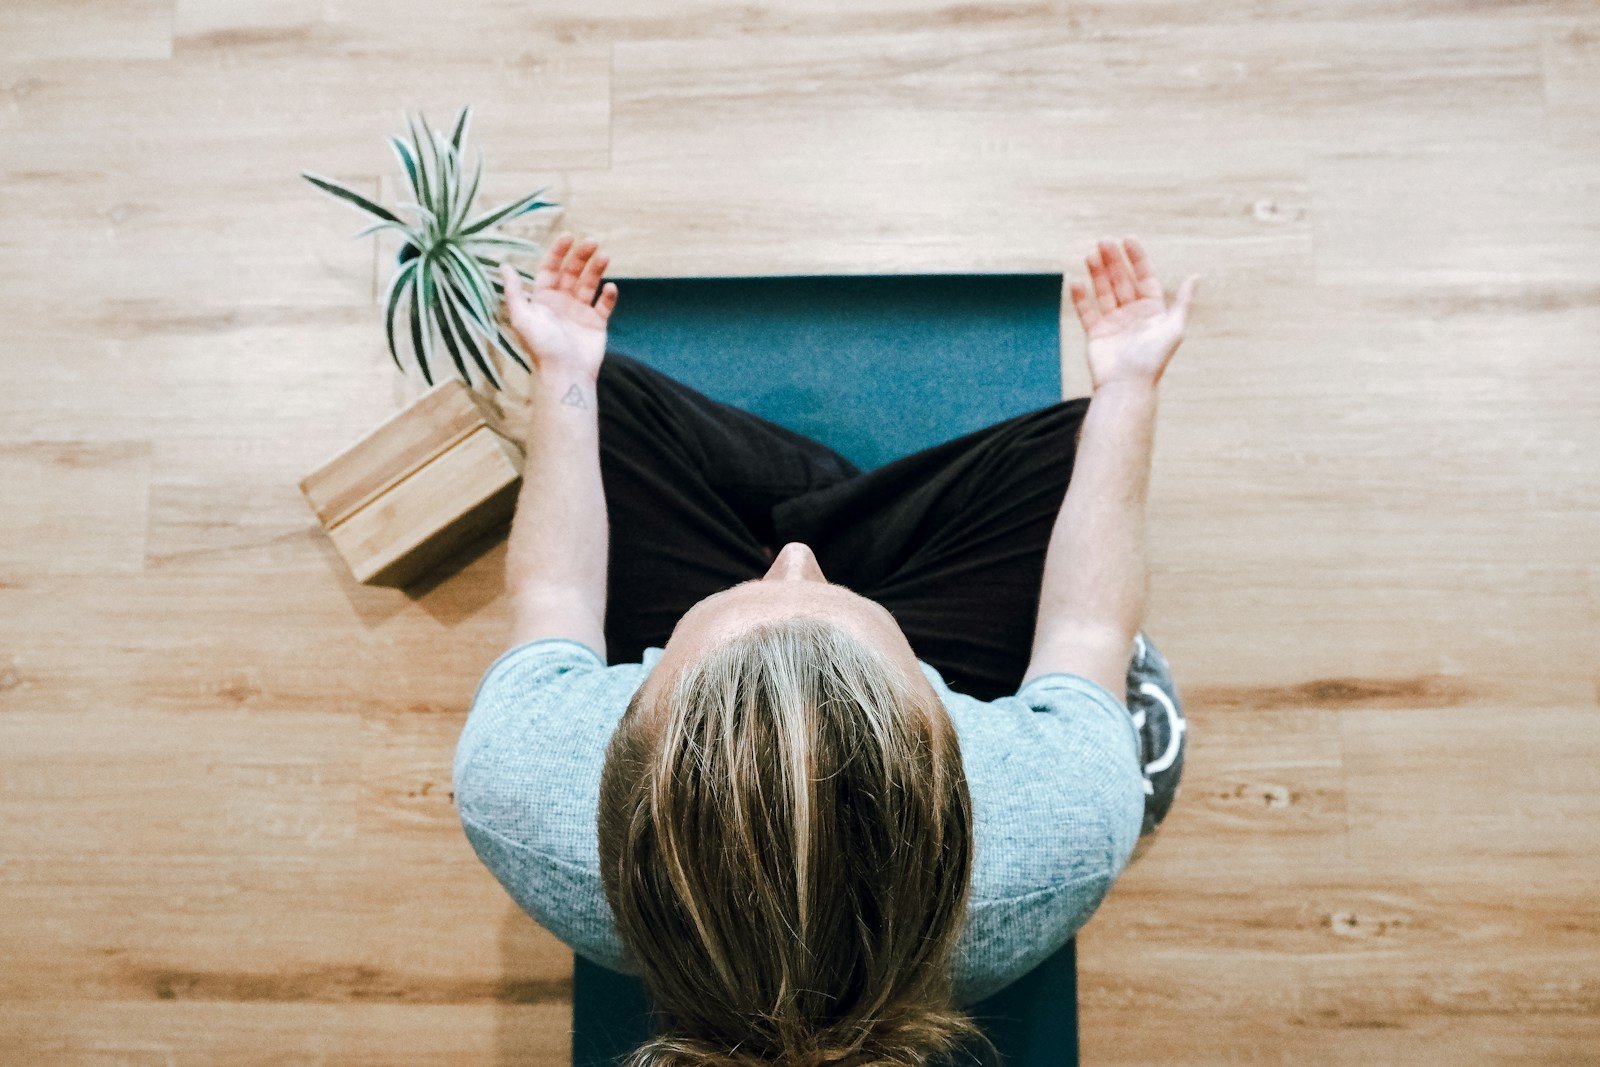 Incorporating Mindfulness Practices into Your Daily Health Regimen